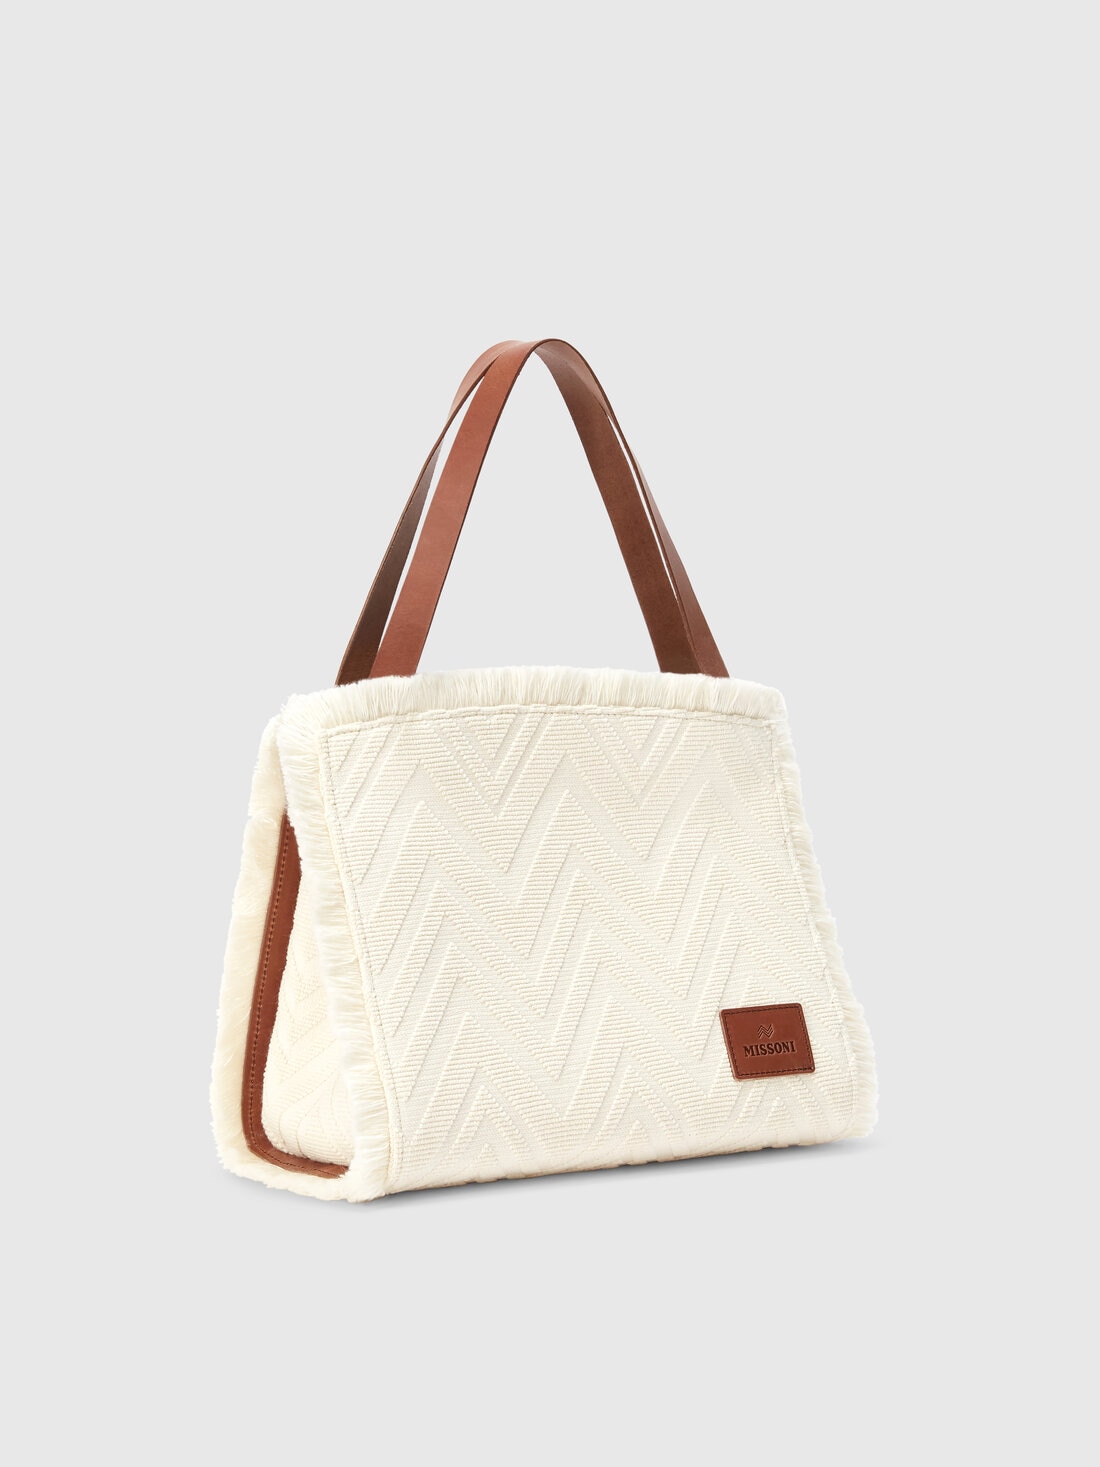 Tote bag in cotton blend with chevron pattern, Brown - 8053147143255 - 1